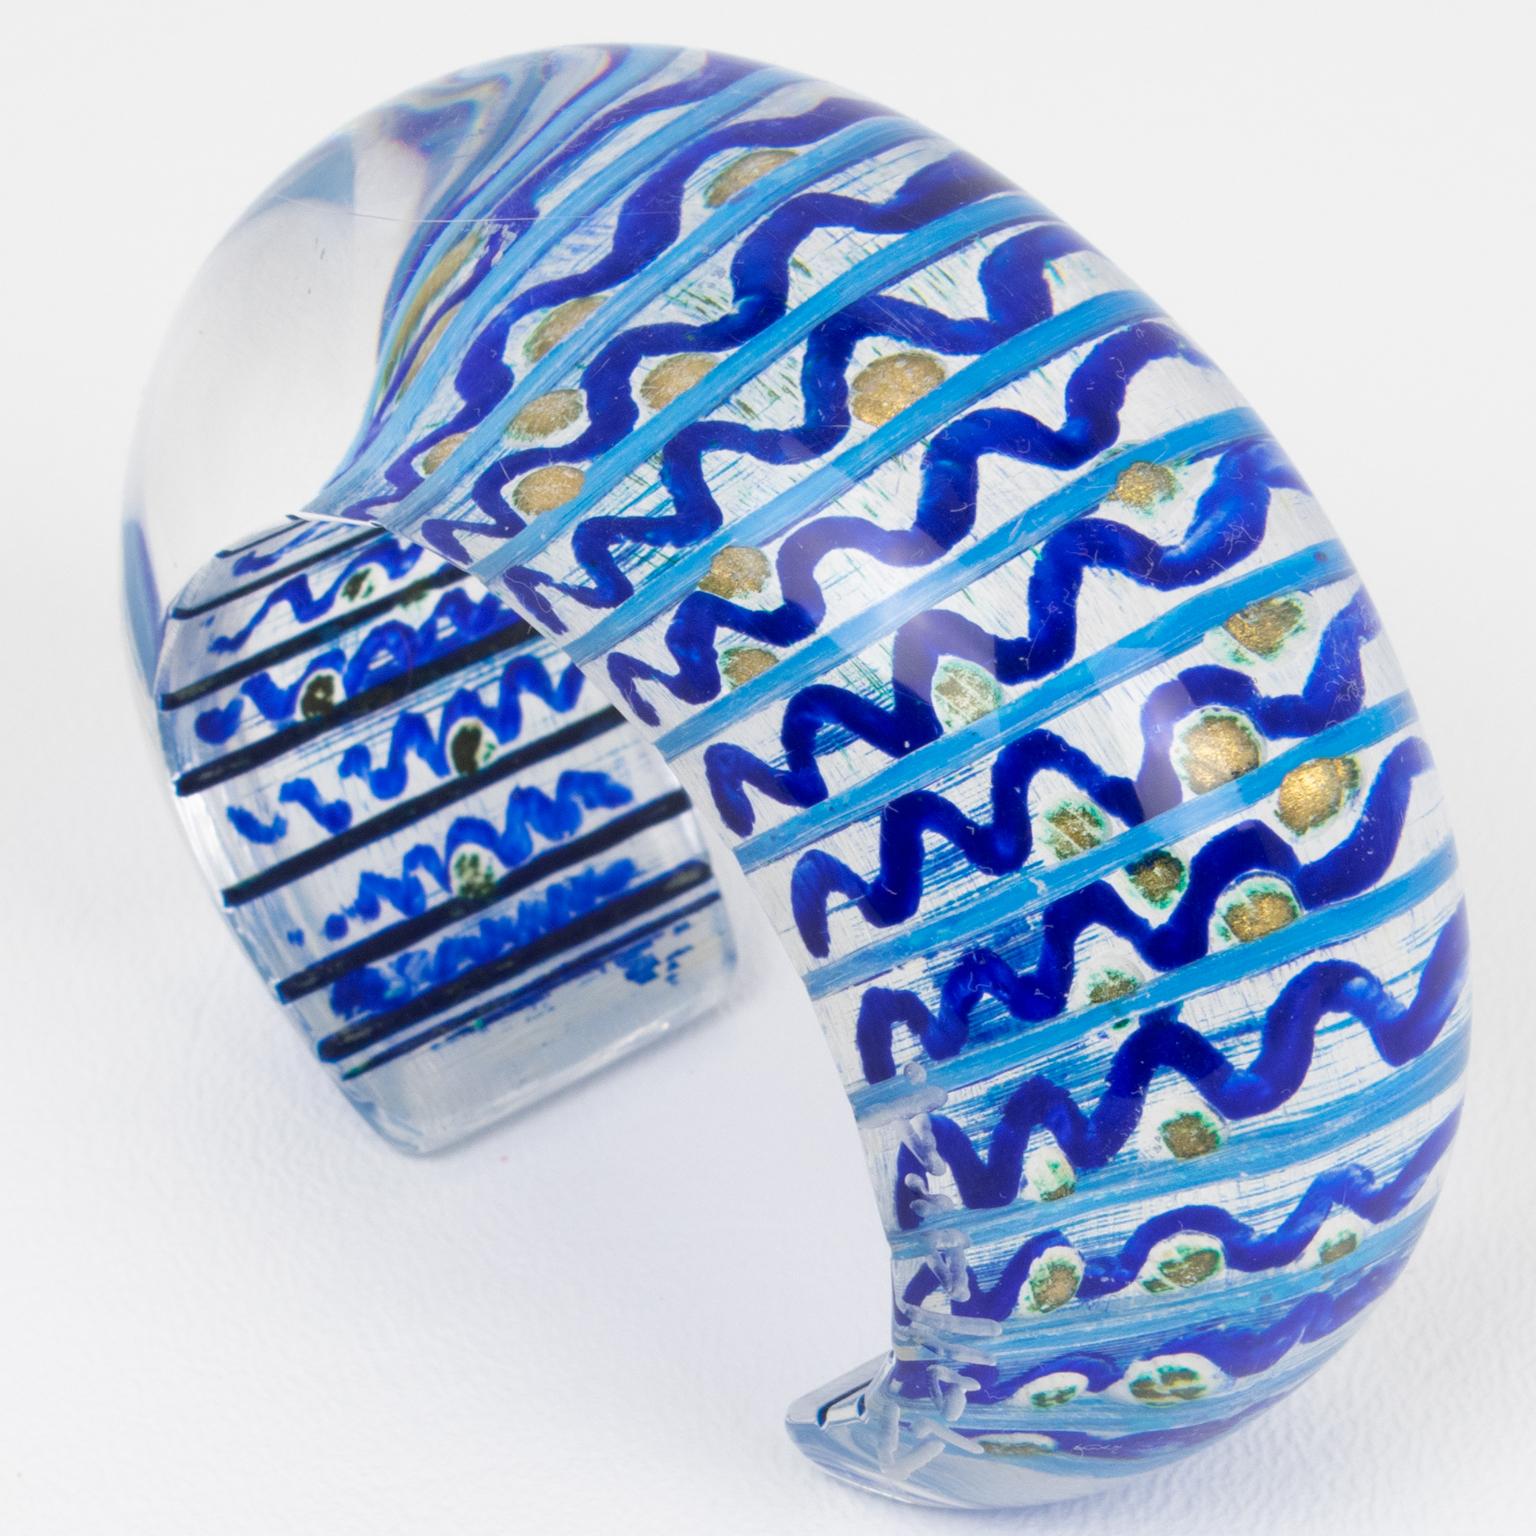 This spectacular Christophe Gallard Lucite cuff bracelet is an incredible piece. This French artist is famous for his sculptures, but his jewelry is equally impressive. The piece features a bold transparent Lucite or Altuglas cuff shape embellished